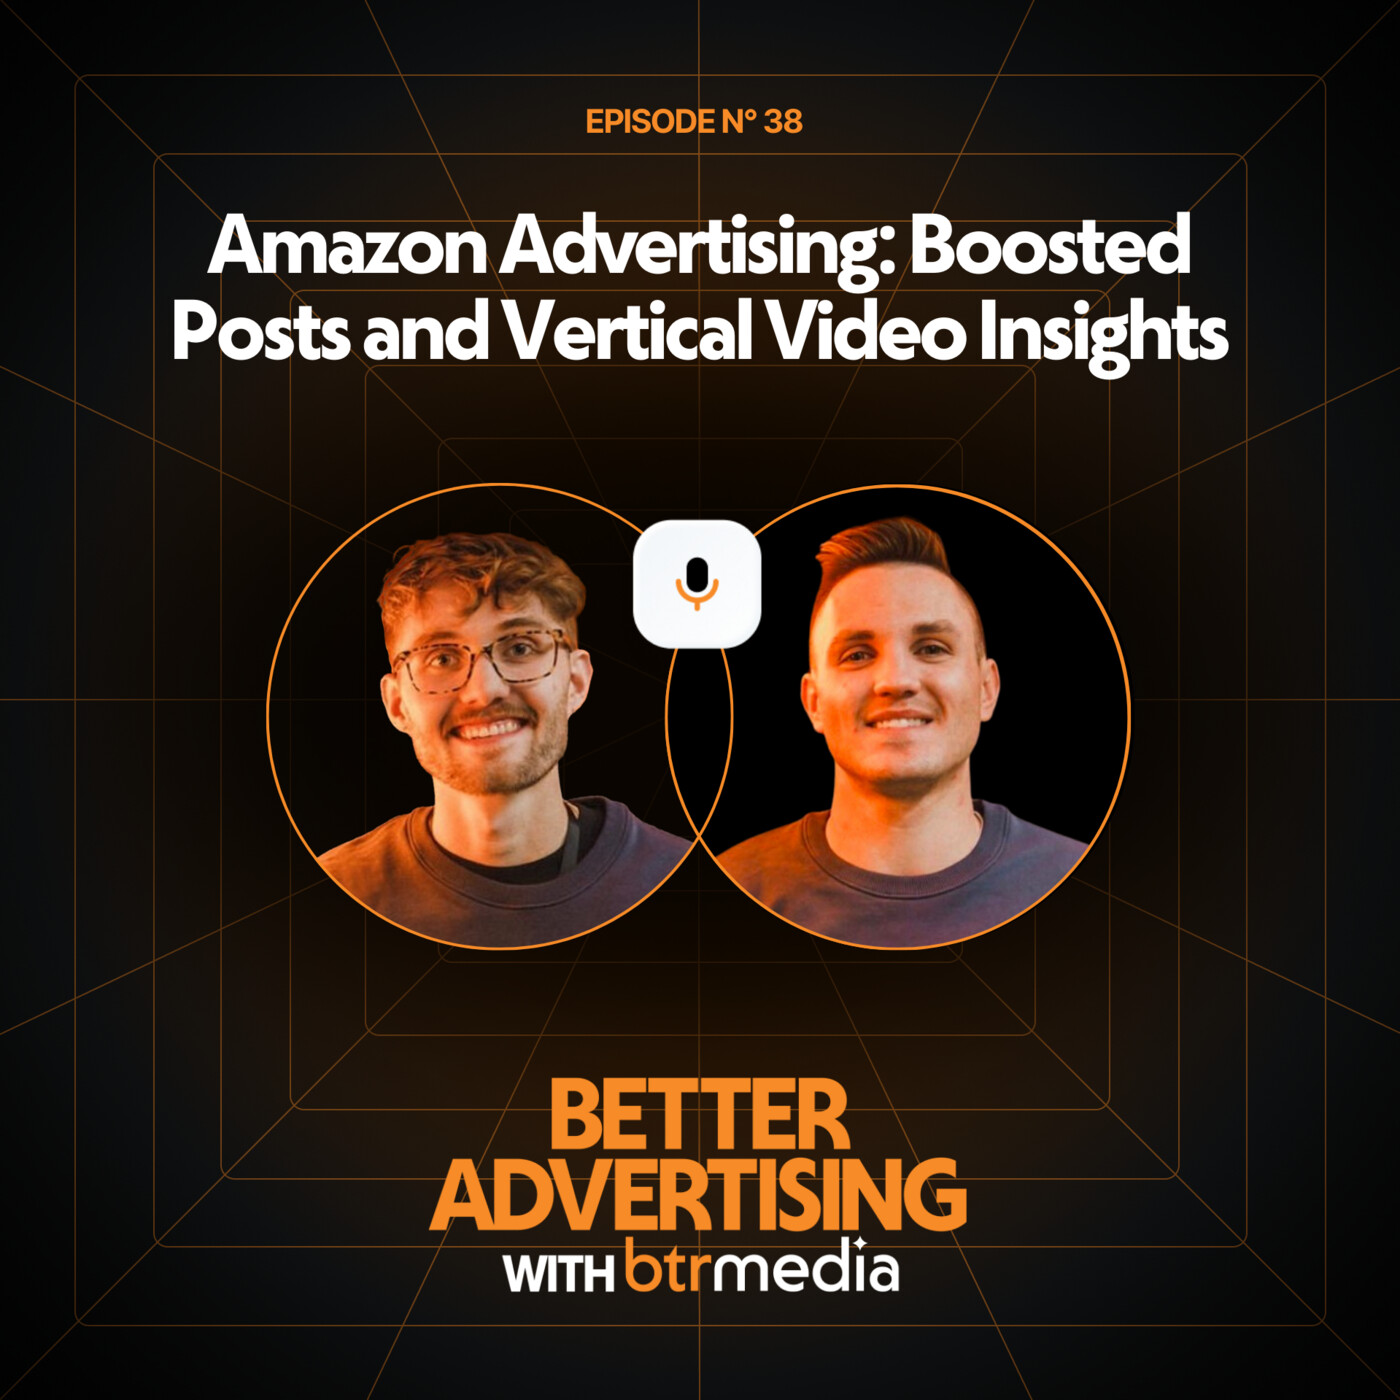 Amazon Advertising: Boosted Posts and Vertical Video Insights